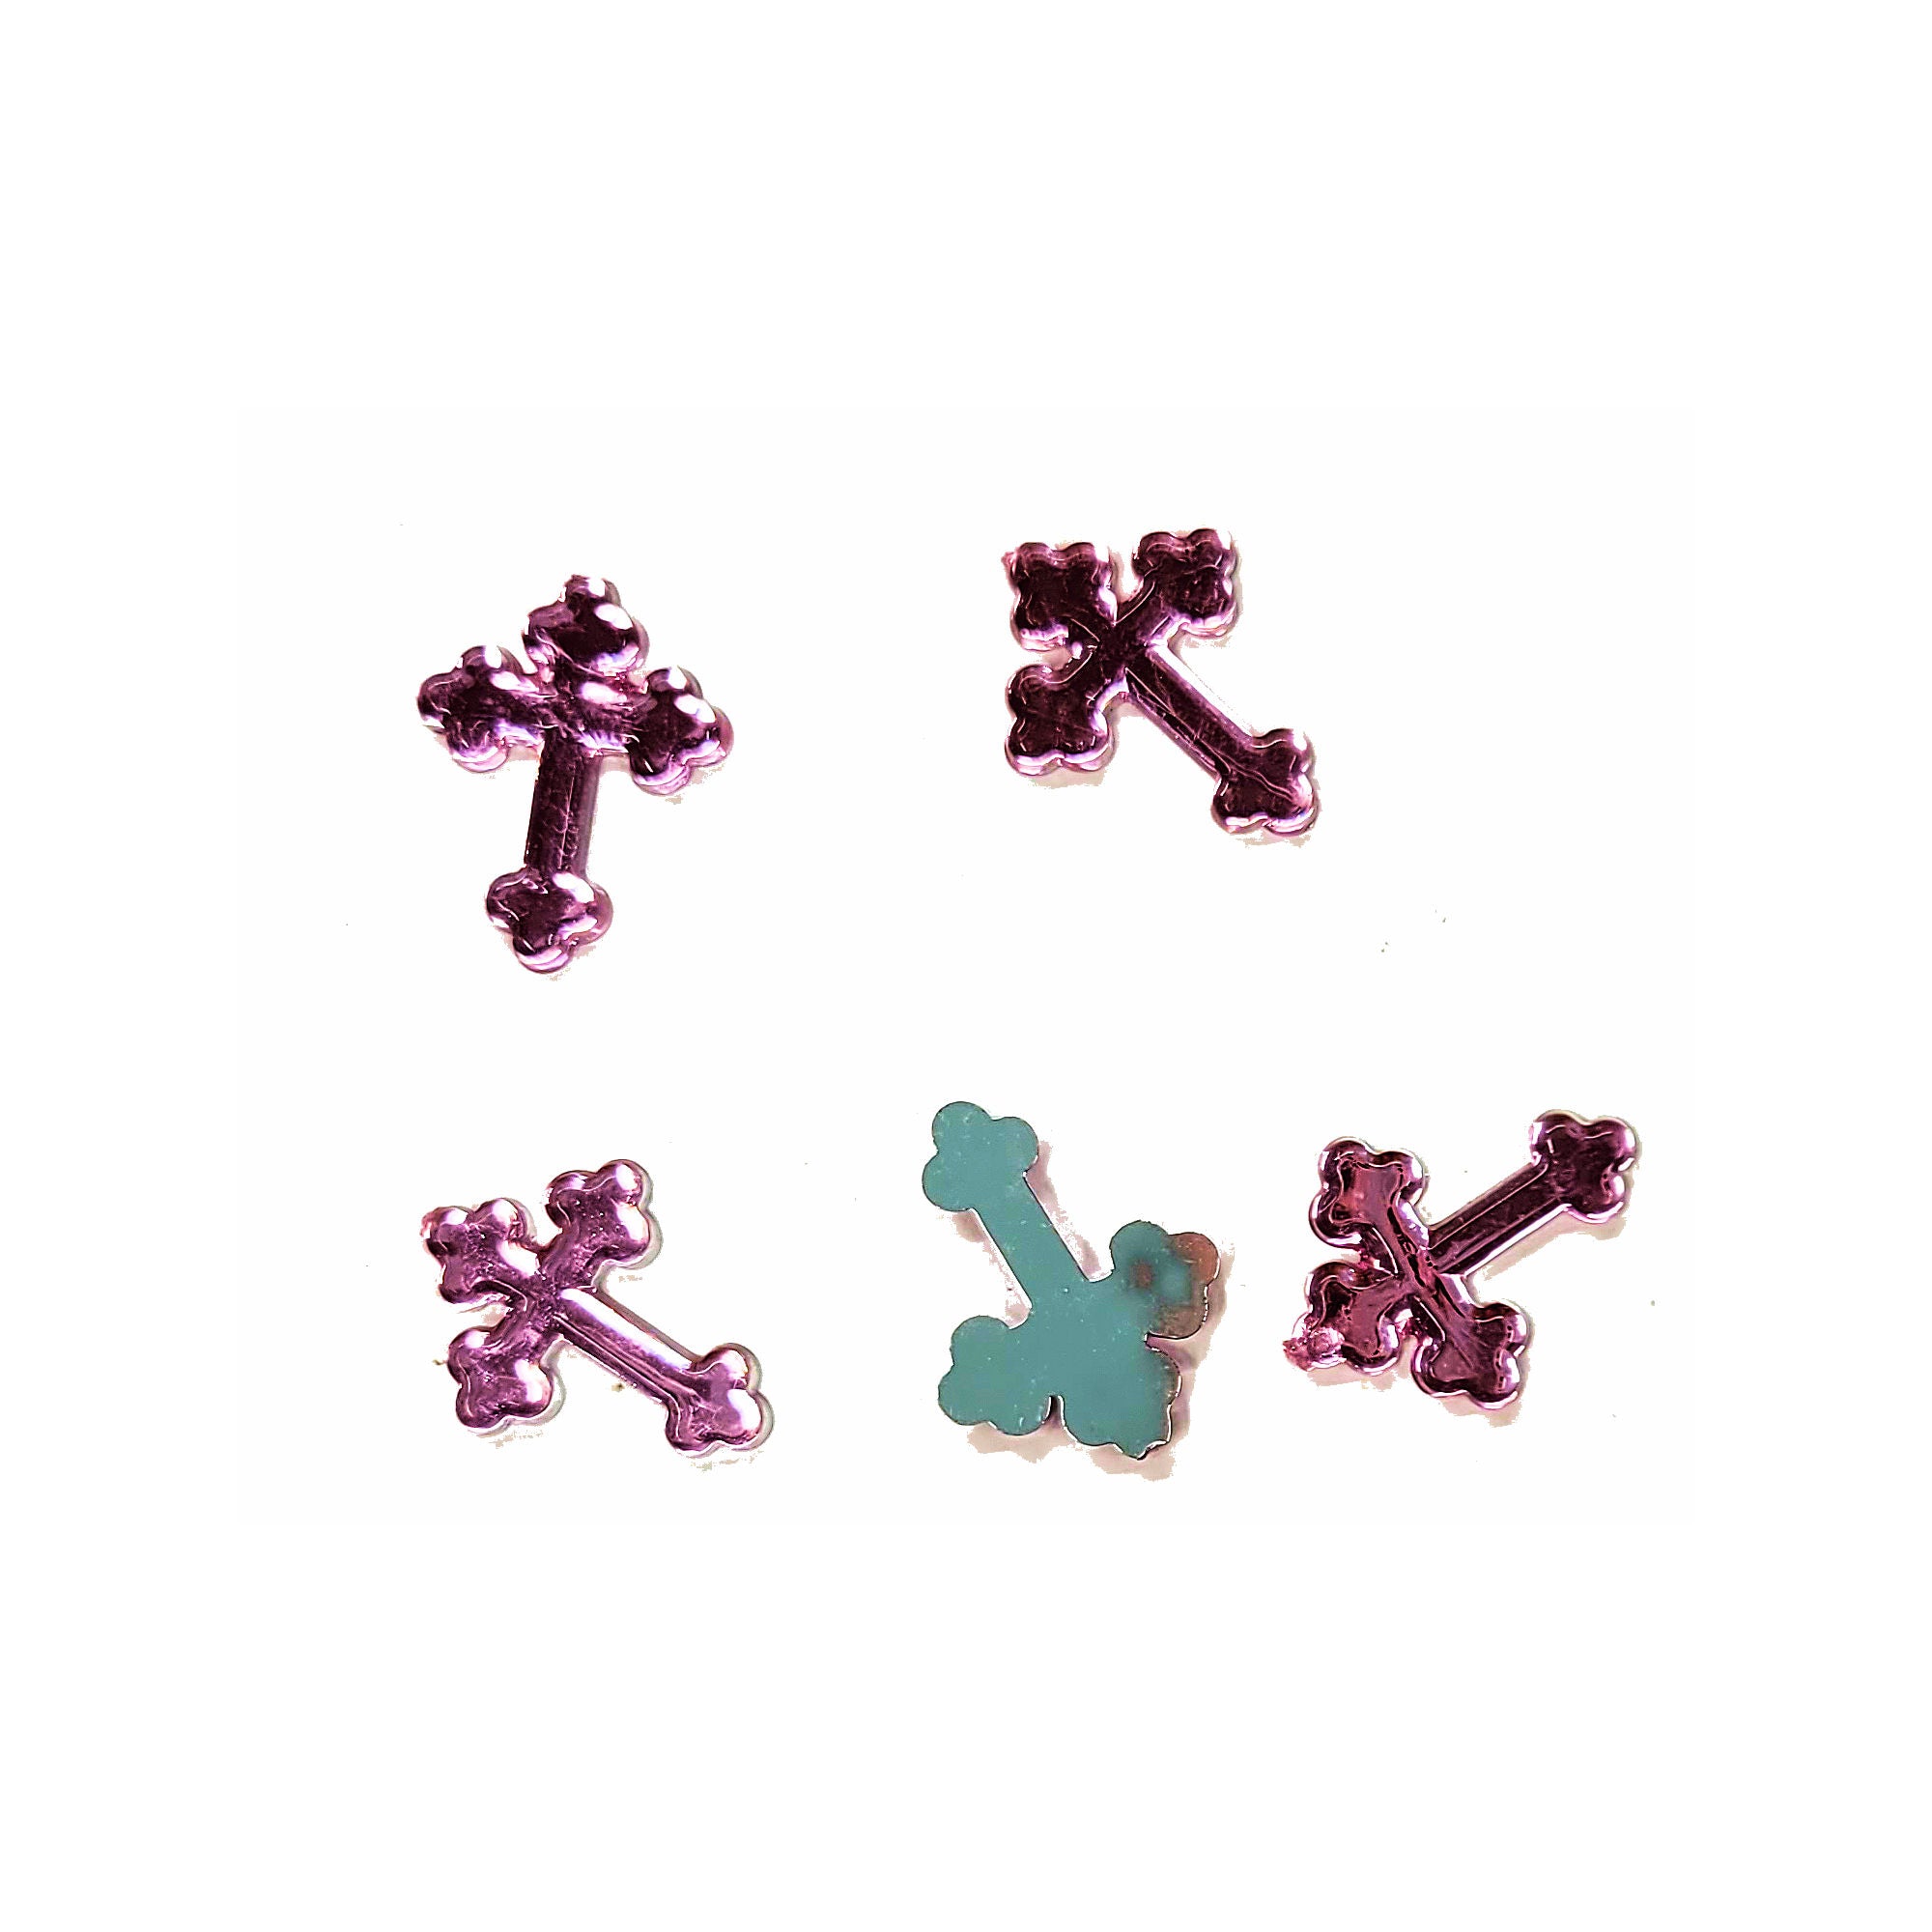 Holy Sacraments Collection .75" Pink Crosses by SSC Designs - Pkg. of 12